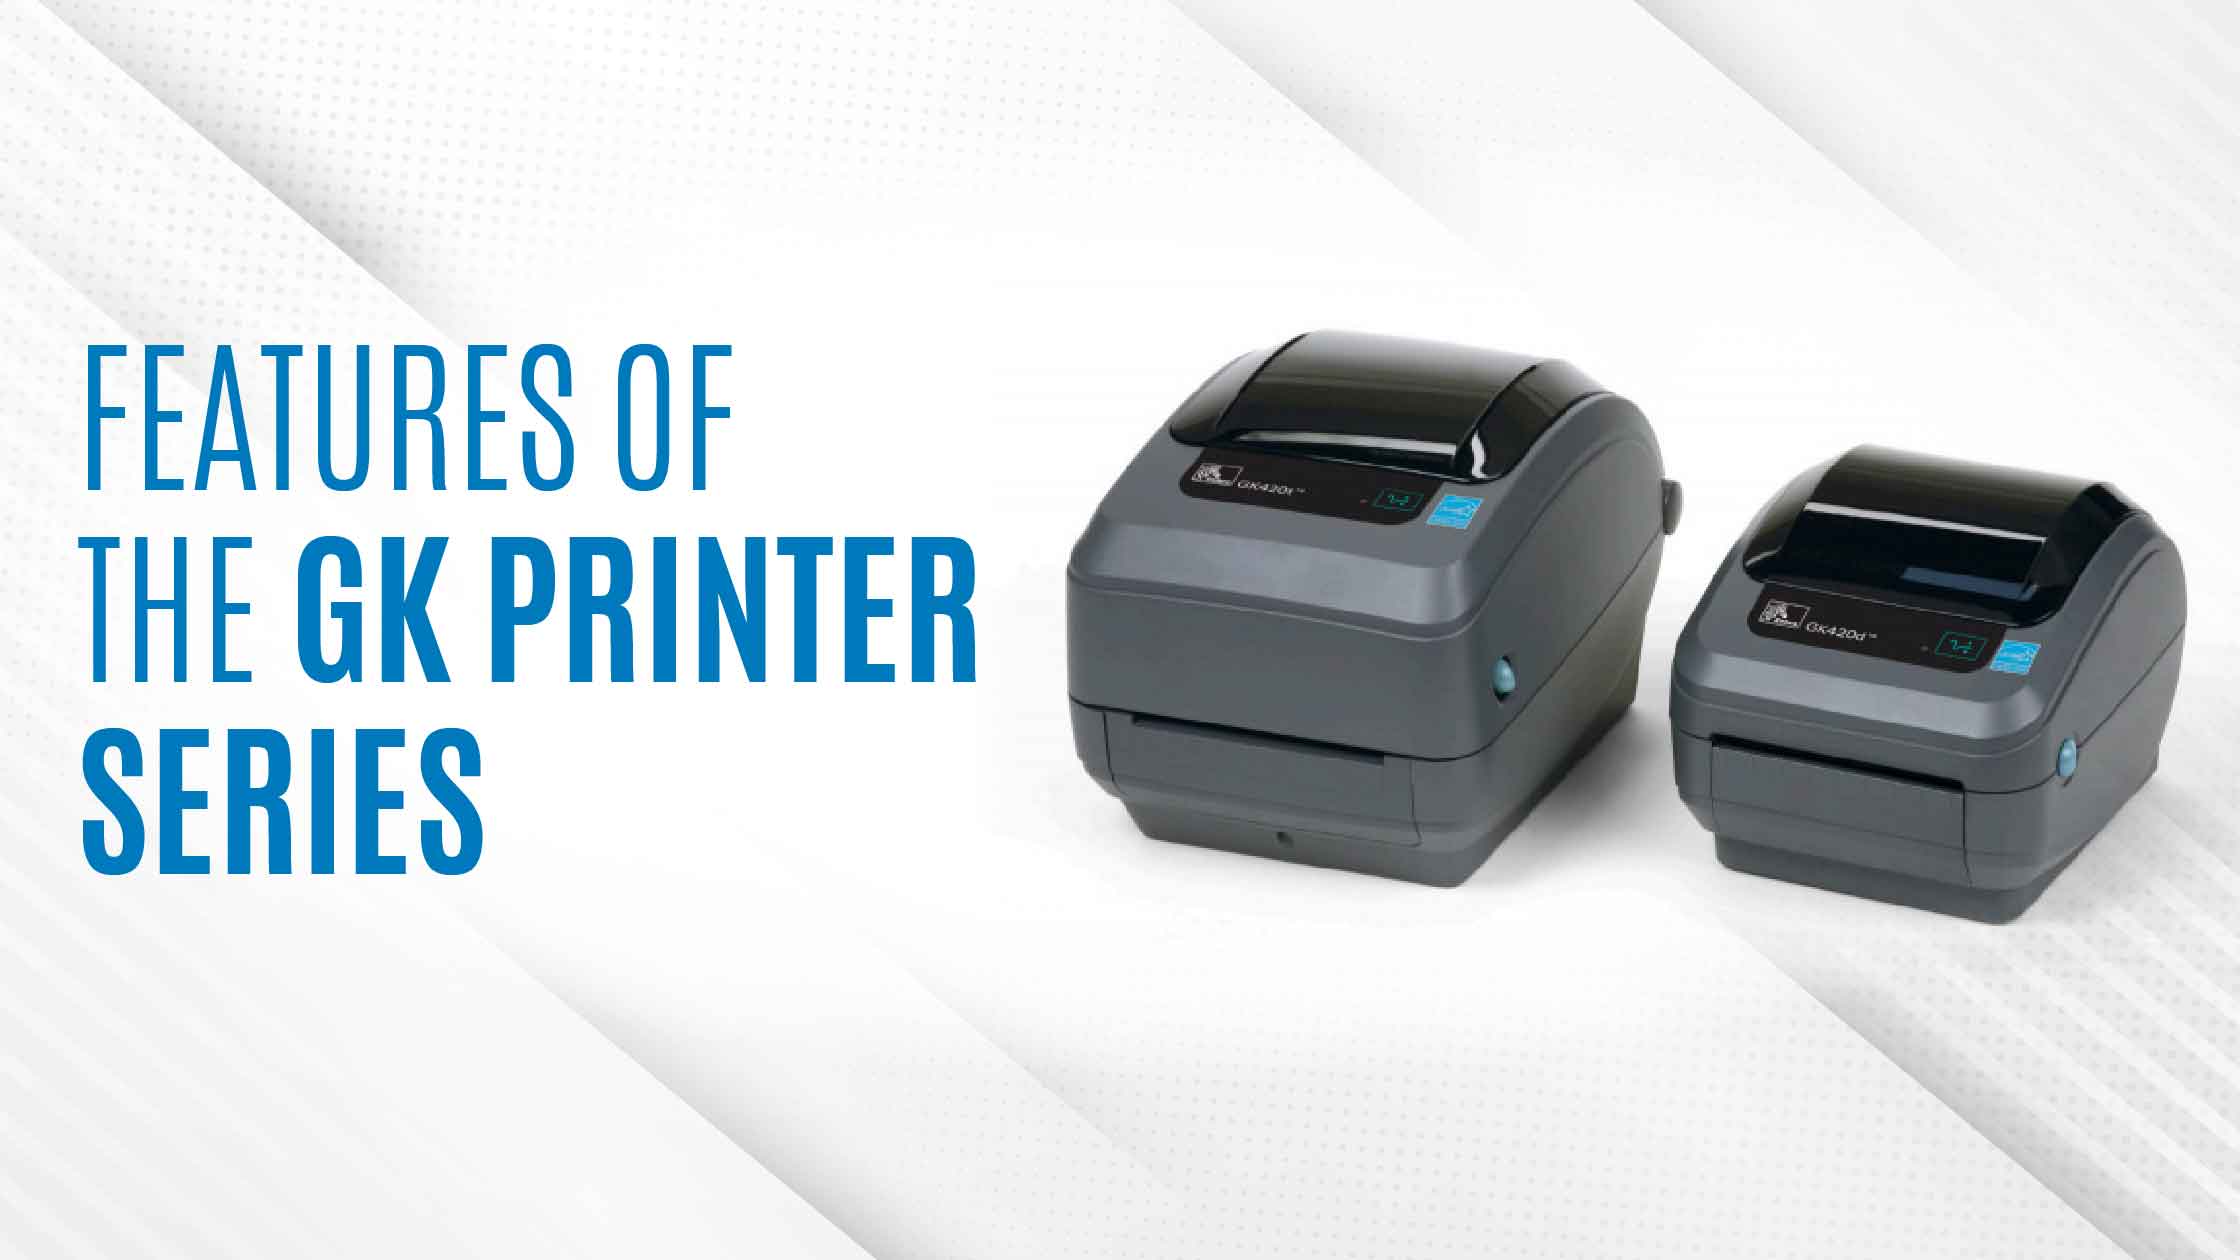 Features of the GK Printer Series